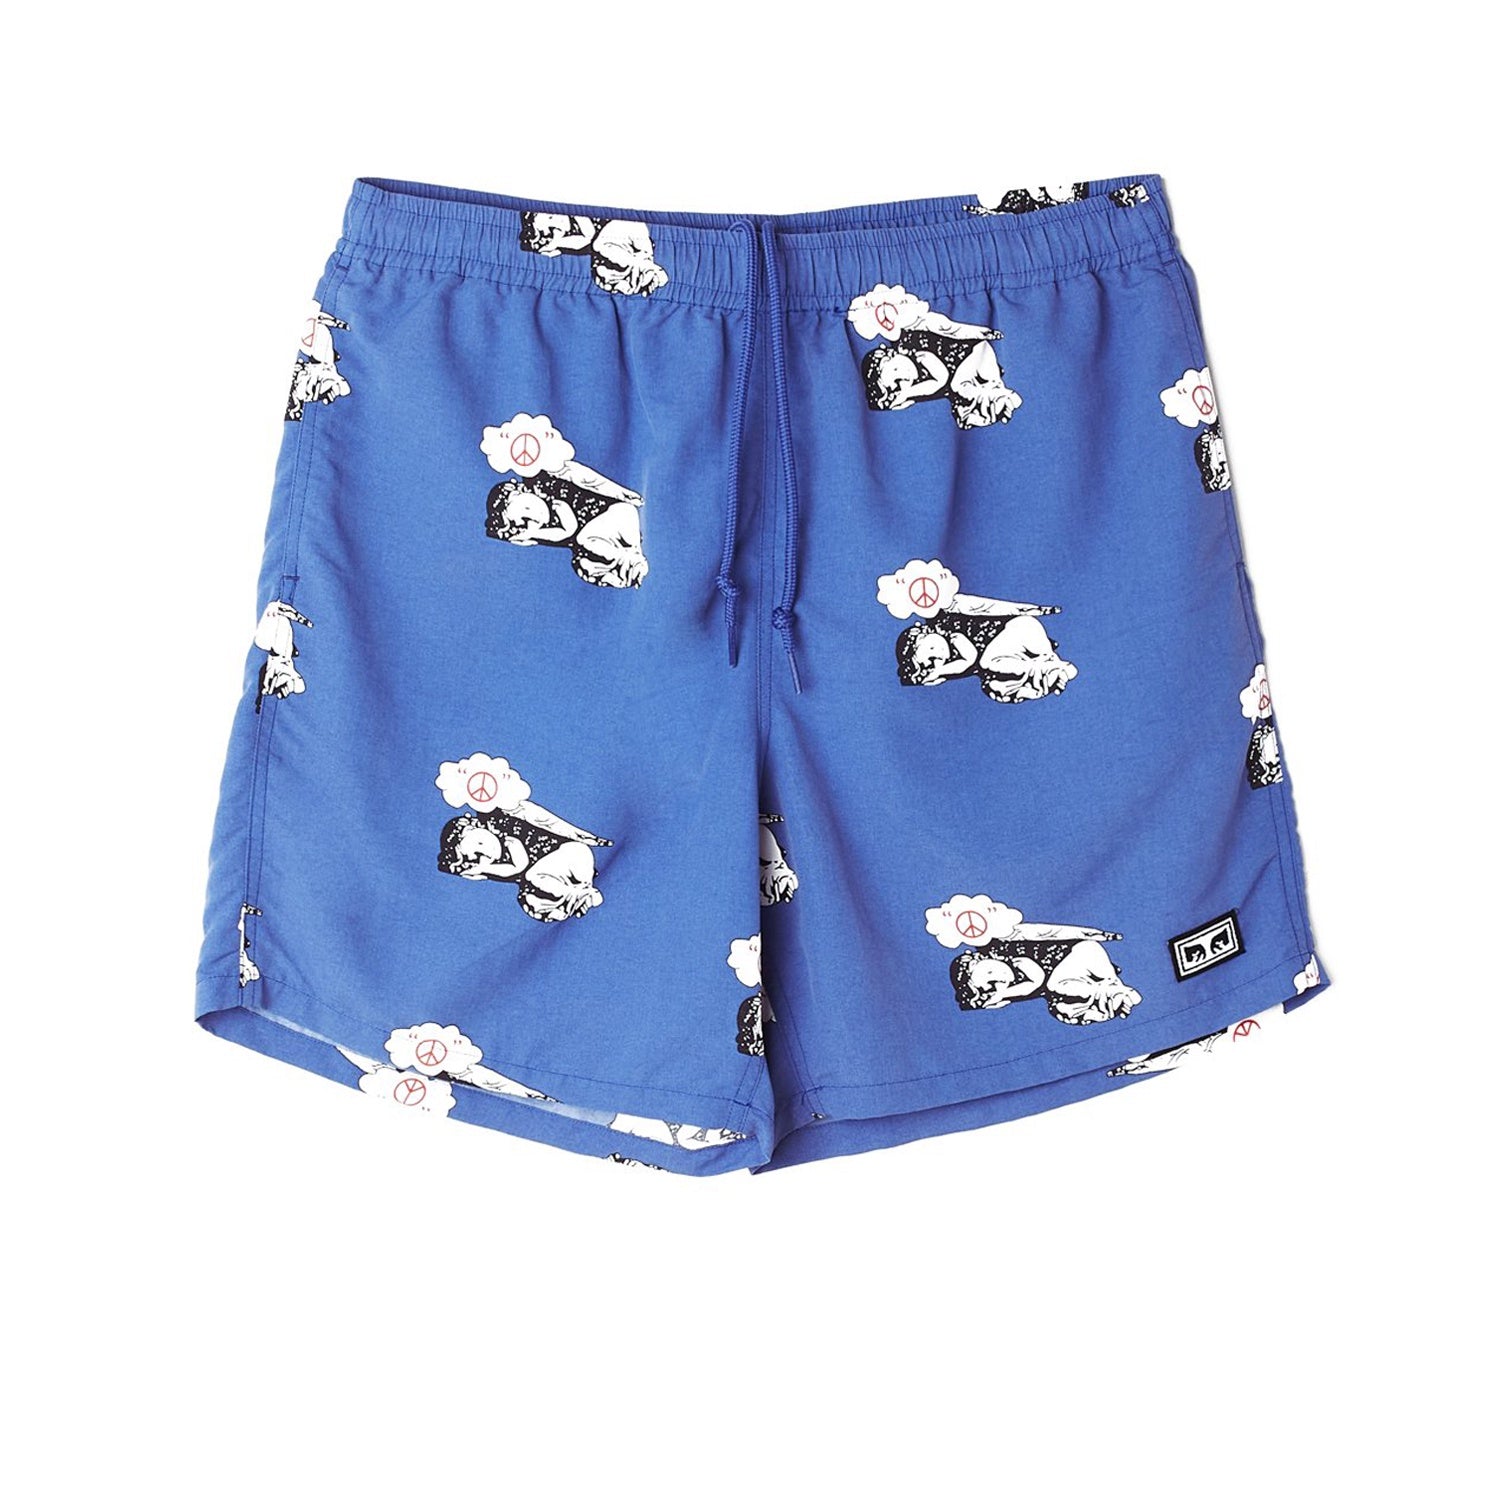 Obey Relaxed Dream Short Royal